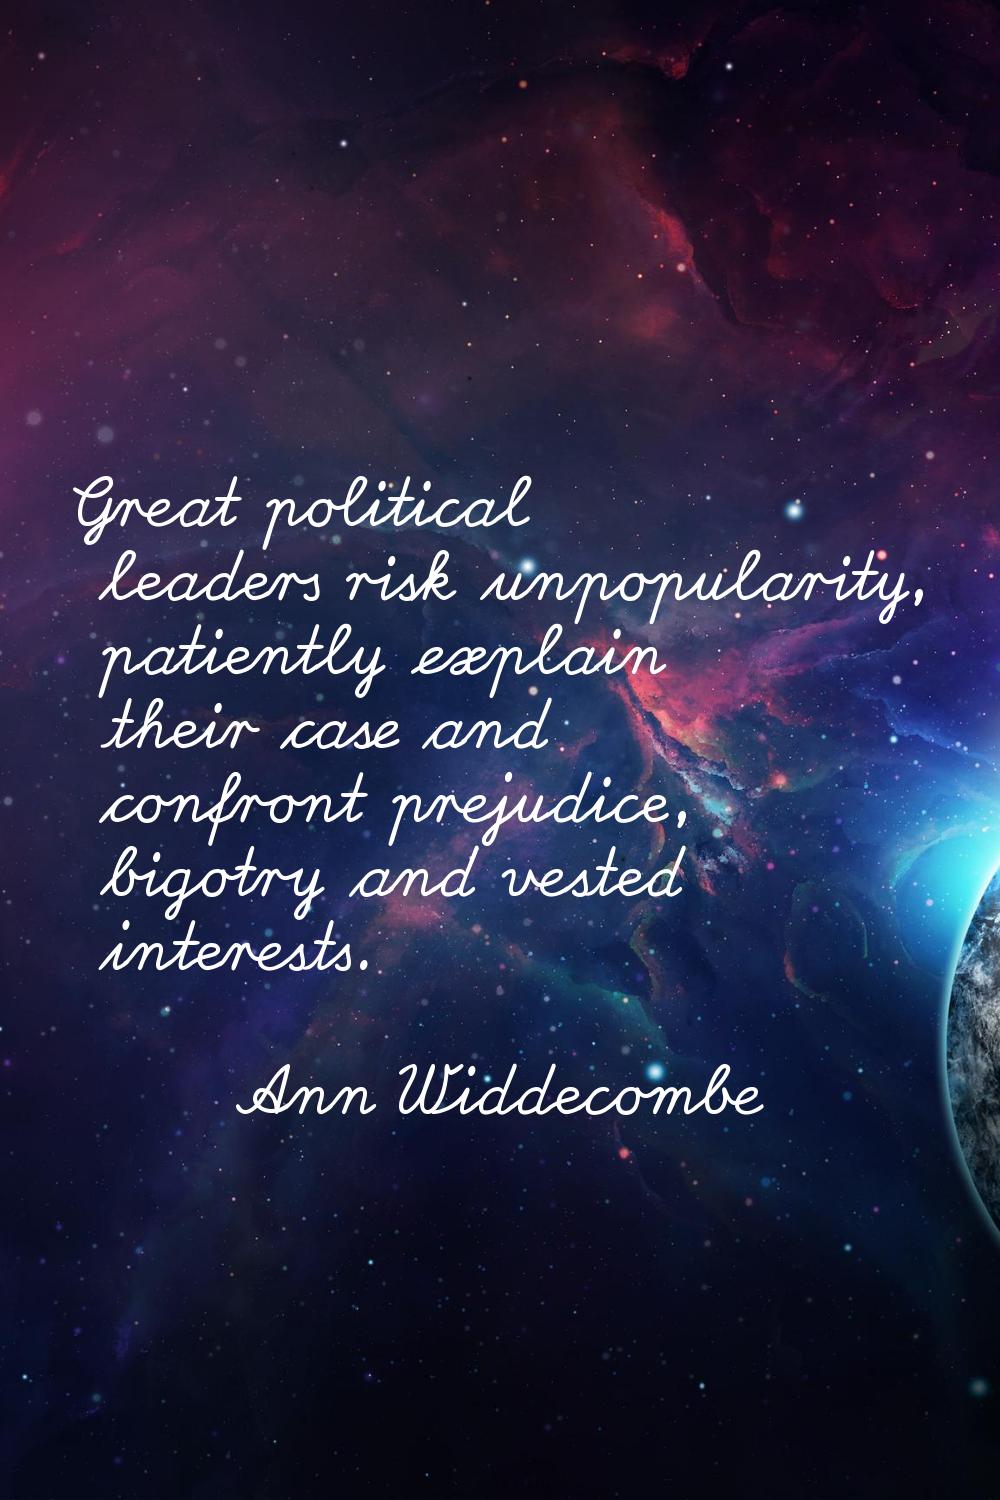 Great political leaders risk unpopularity, patiently explain their case and confront prejudice, big